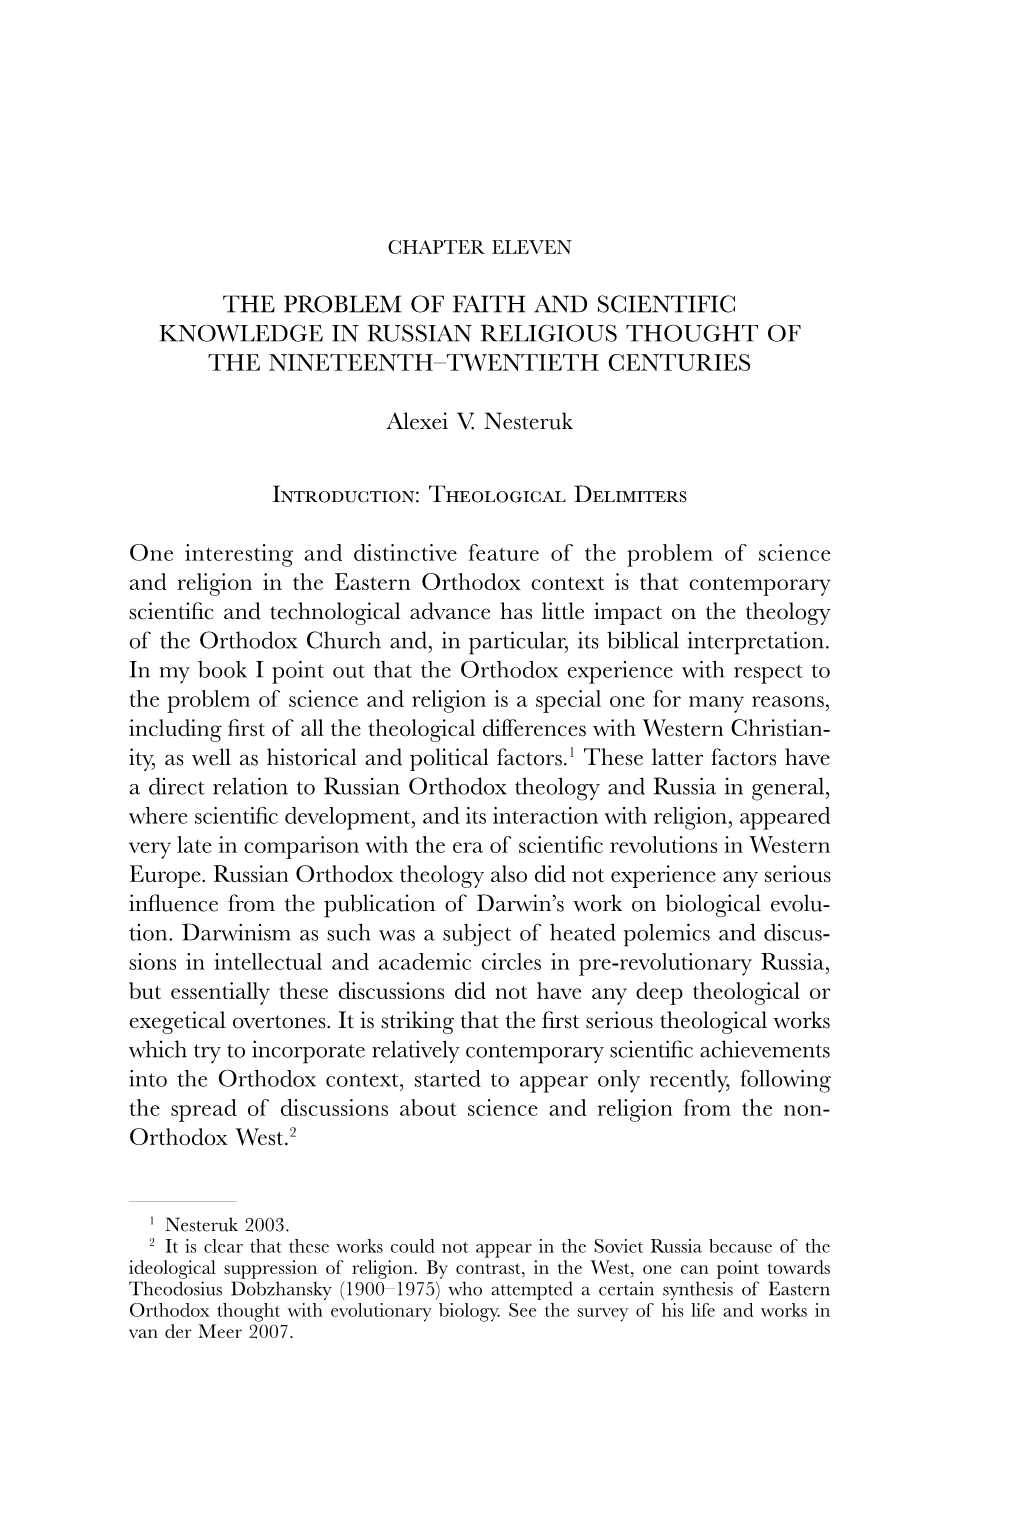 The Problem of Faith and Scientific Knowledge in Russian Religious Thought of the Nineteenth–Twentieth Centuries